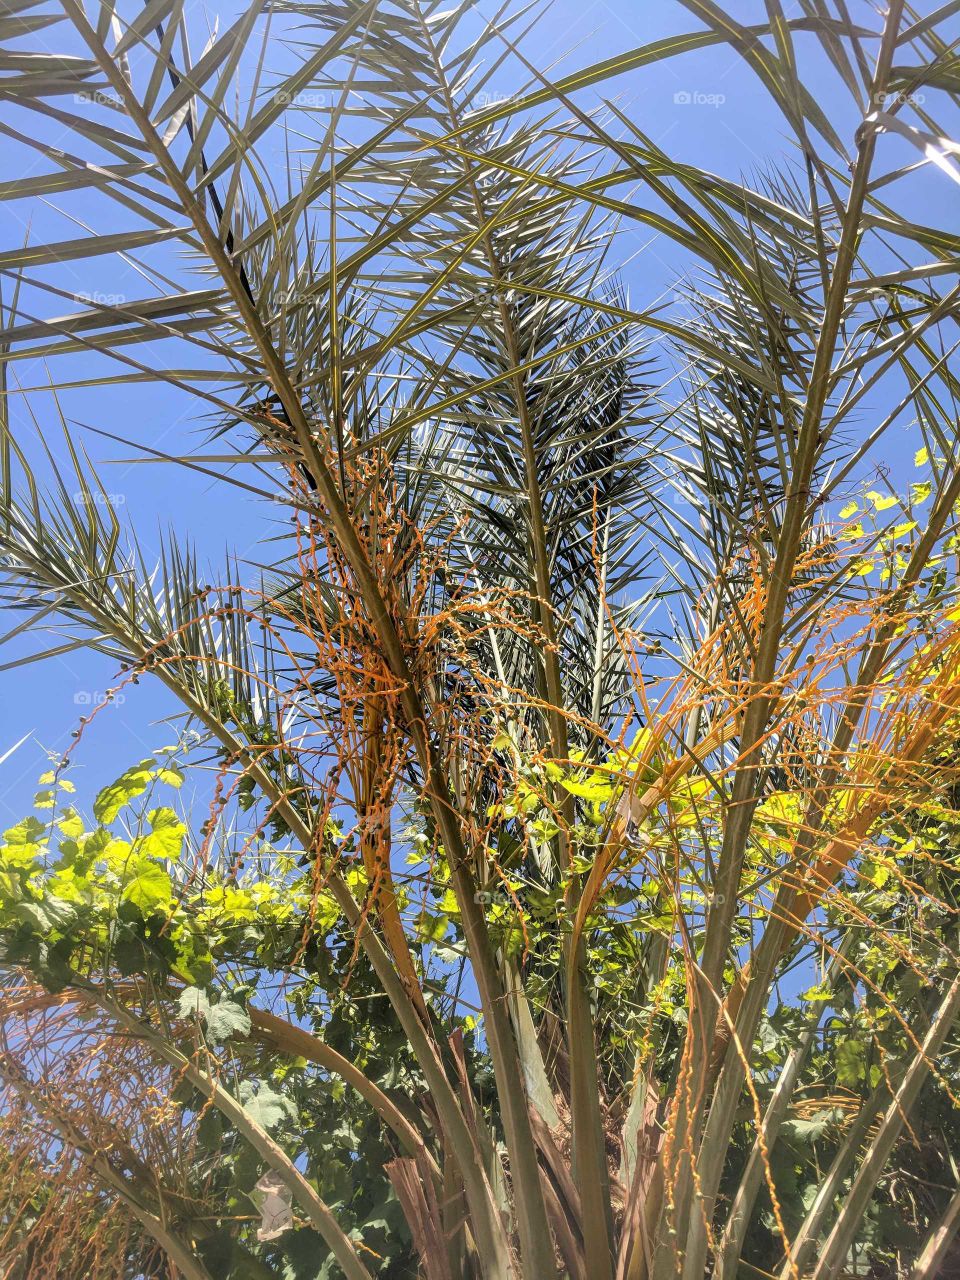 Palm Fronds and Leaves and Orange Brush in Morocco (Artistic Shot)